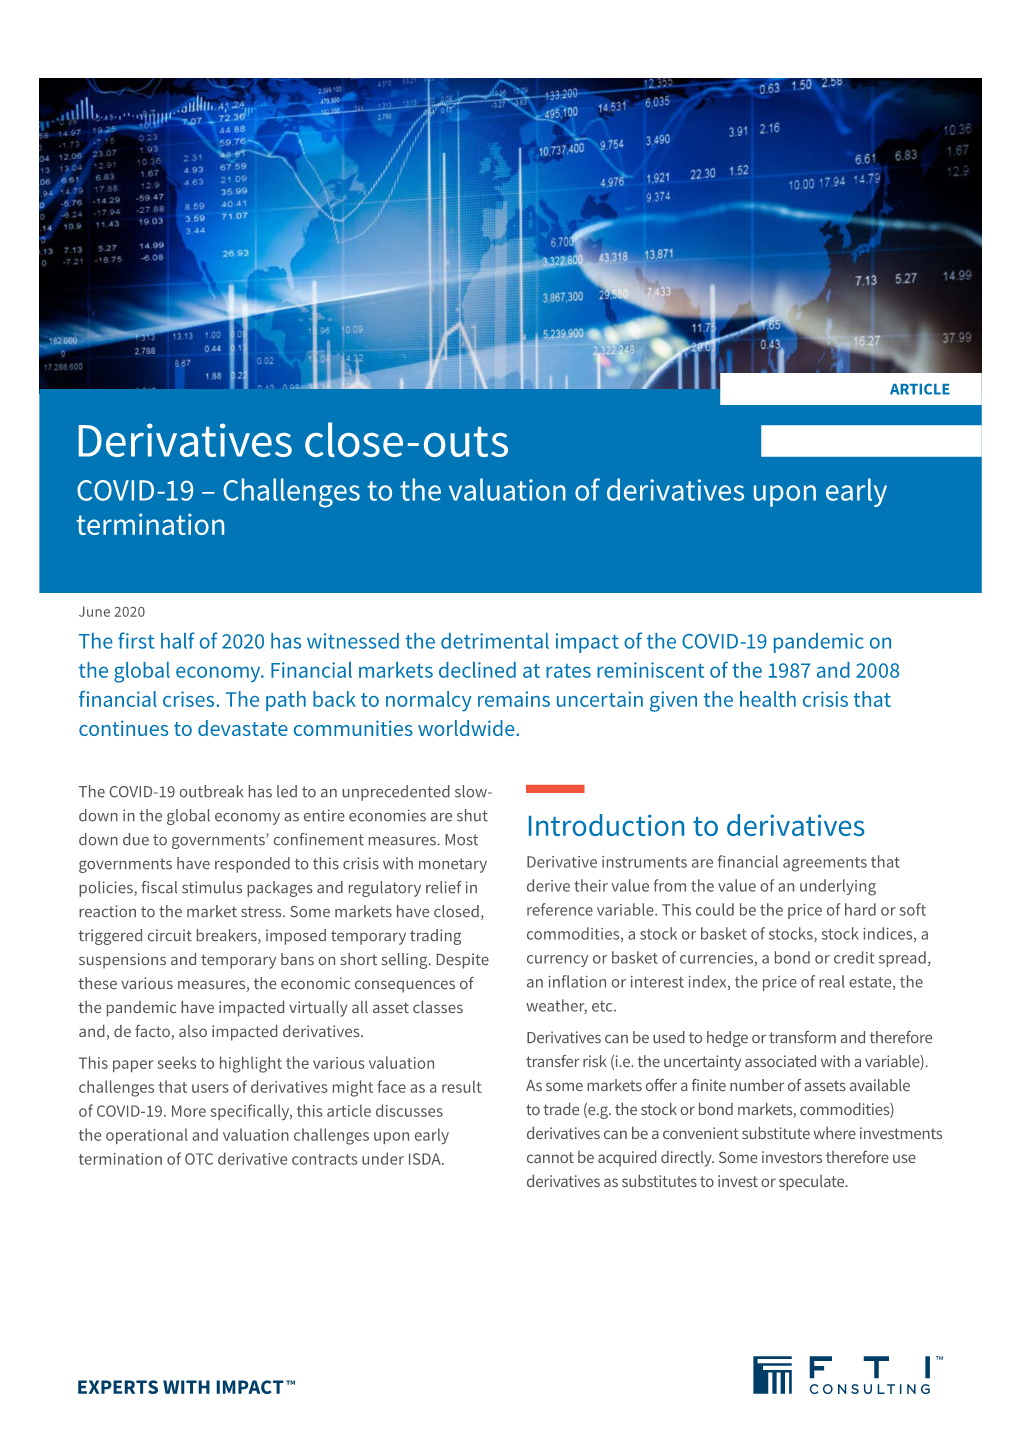 Derivatives Close-Outs COVID-19 – Challenges to the Valuation of Derivatives Upon Early Termination